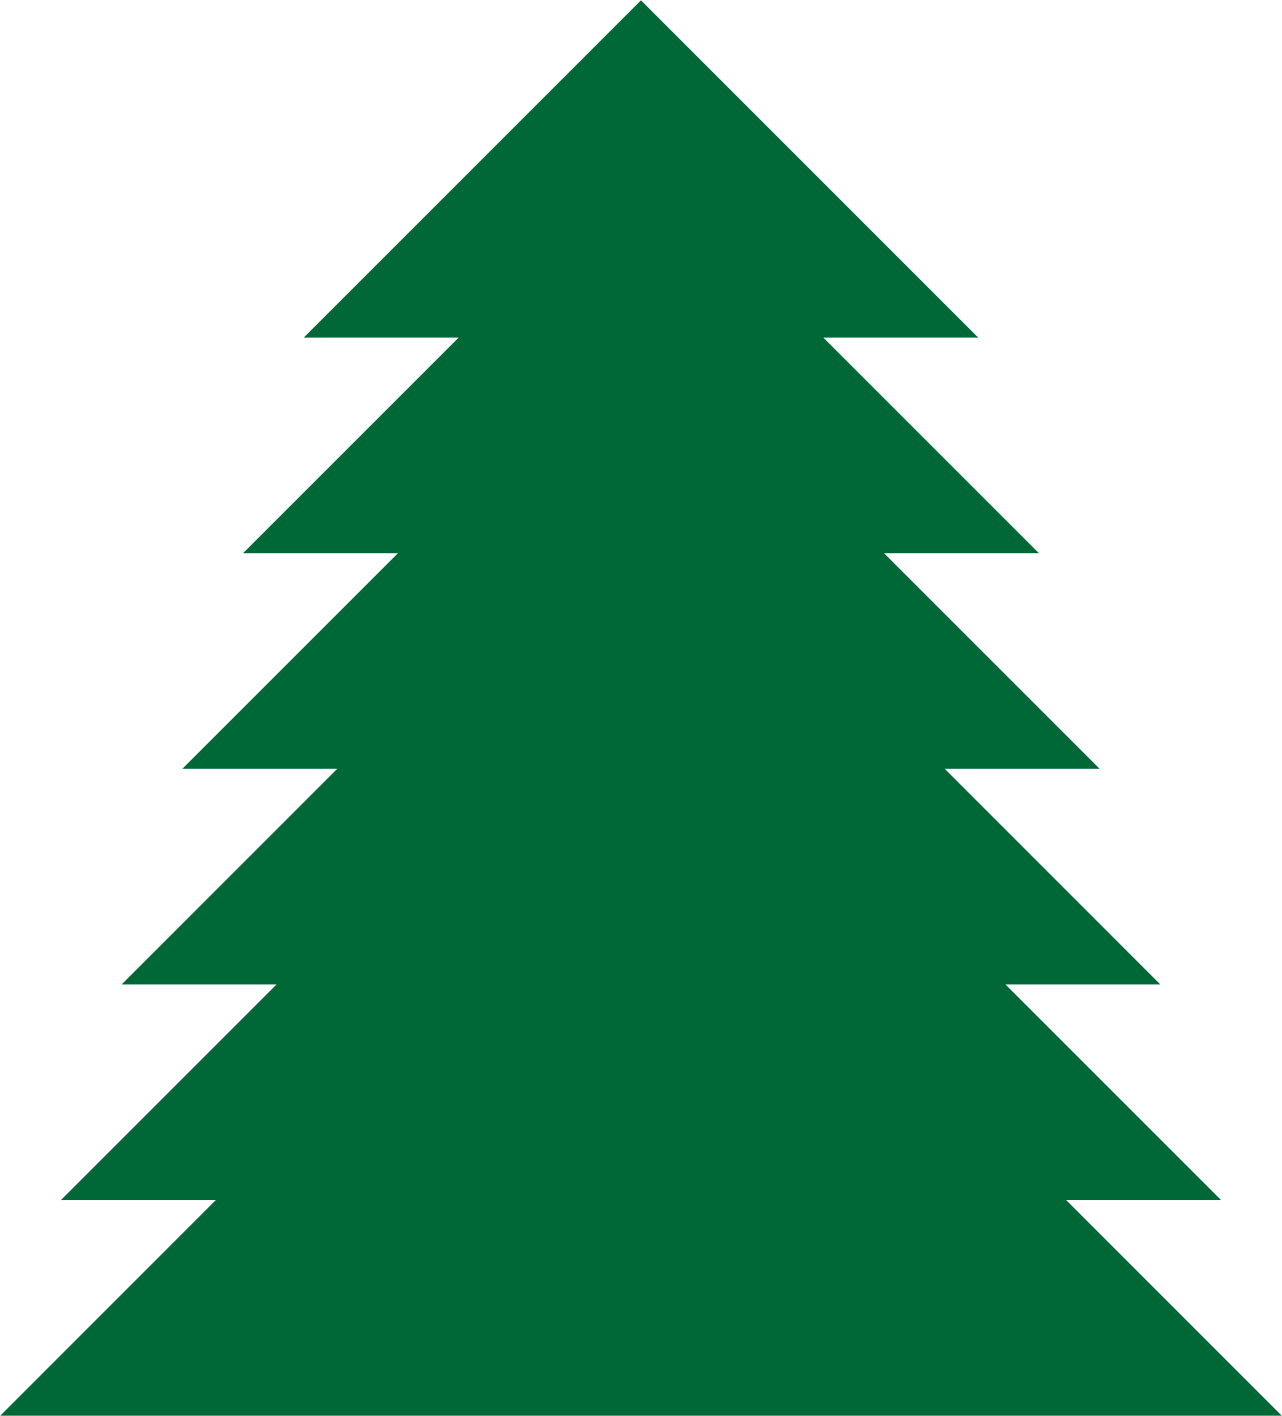 Pine tree clip art to download - Cliparting.com